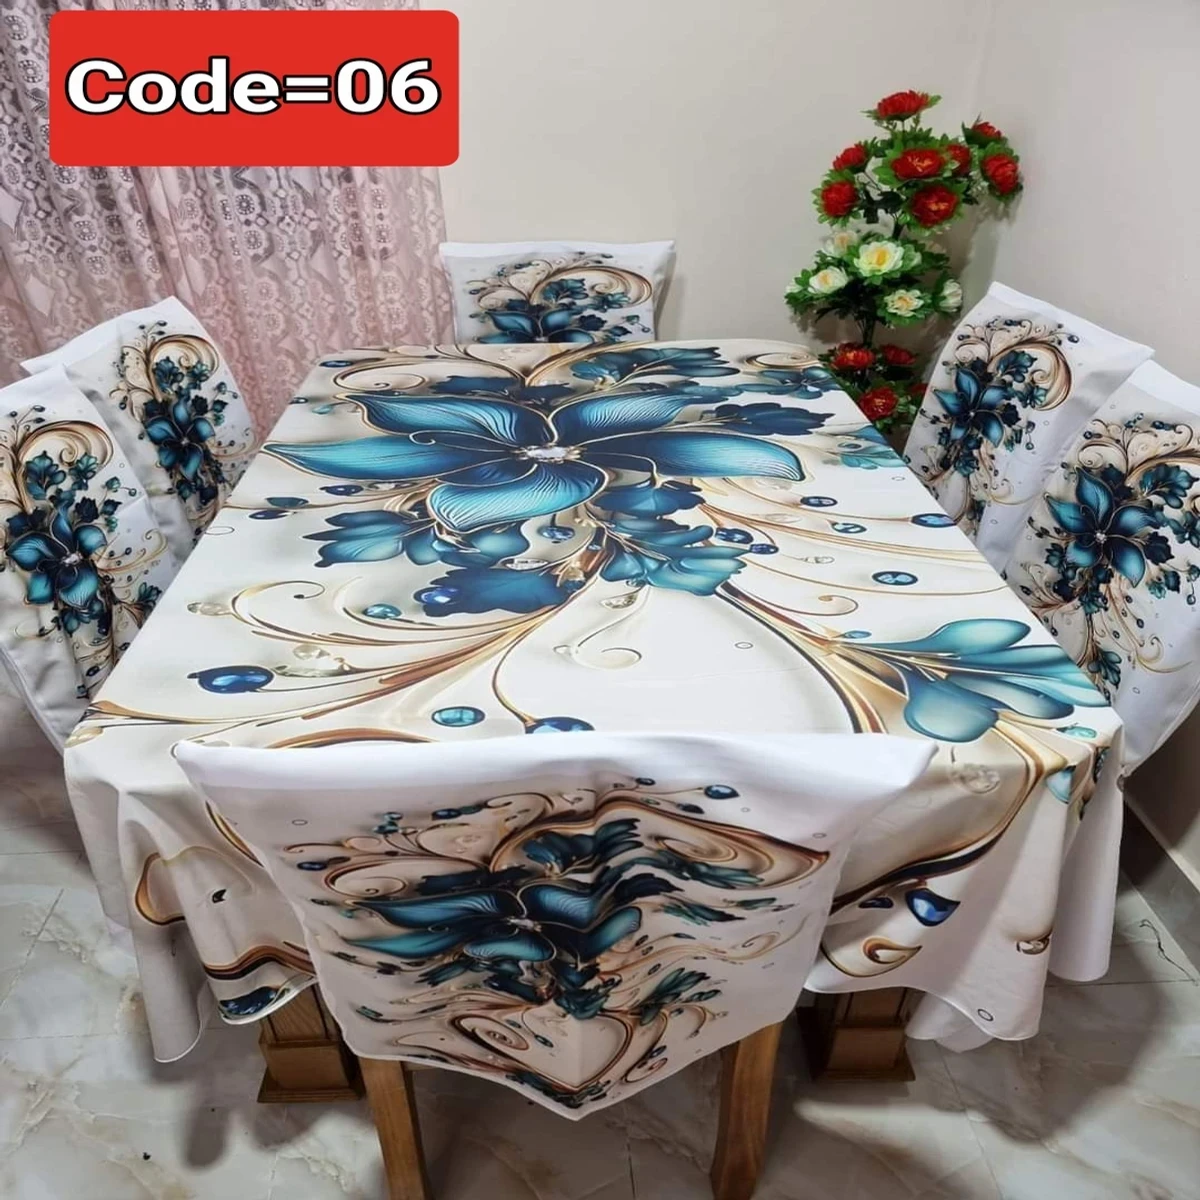 3D Pint Dining Table and Chair Cover Code= 06